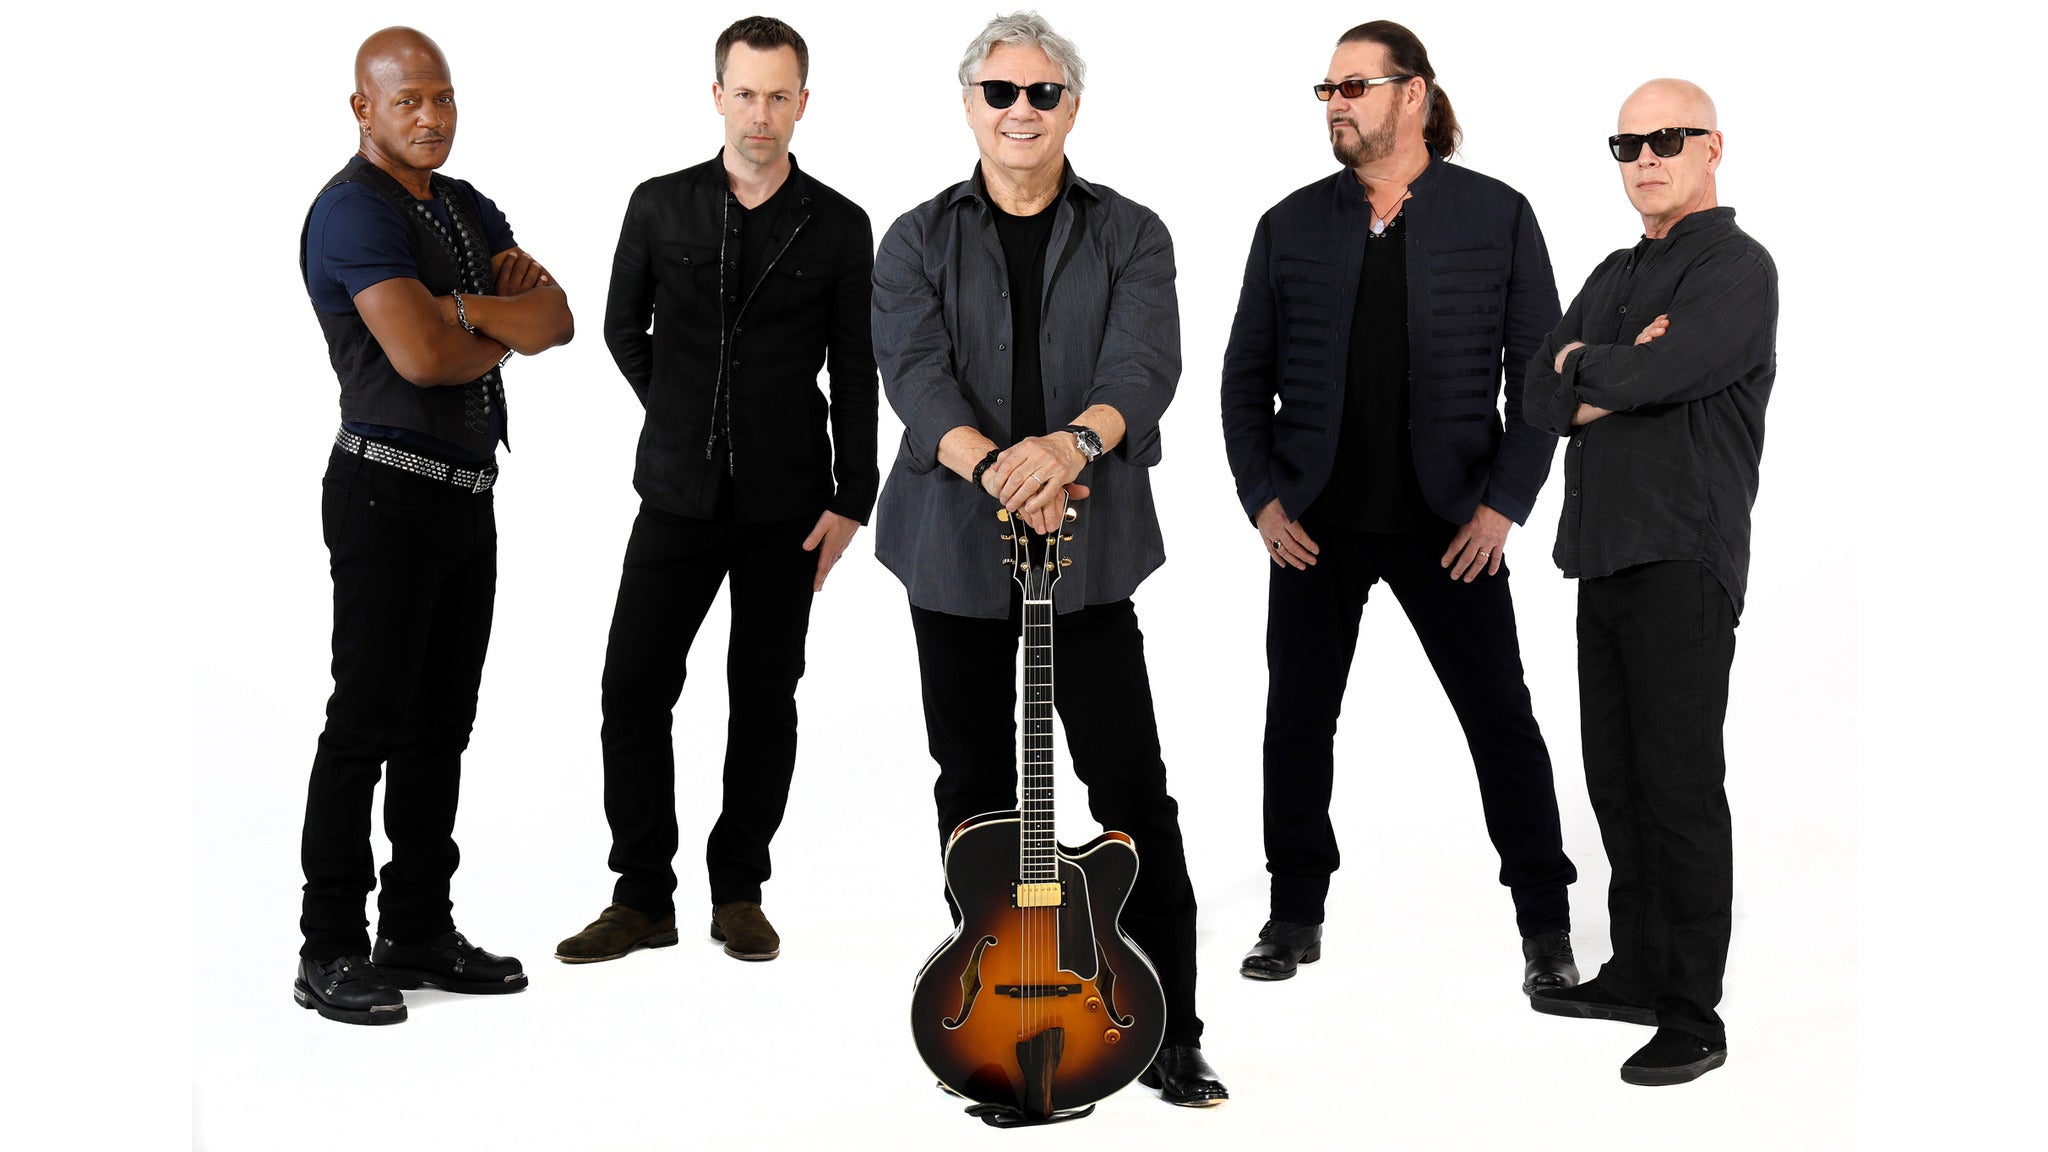 presale passcode for Steve Miller Band tickets in Tampa - FL (Seminole Hard Rock Tampa Event Center)